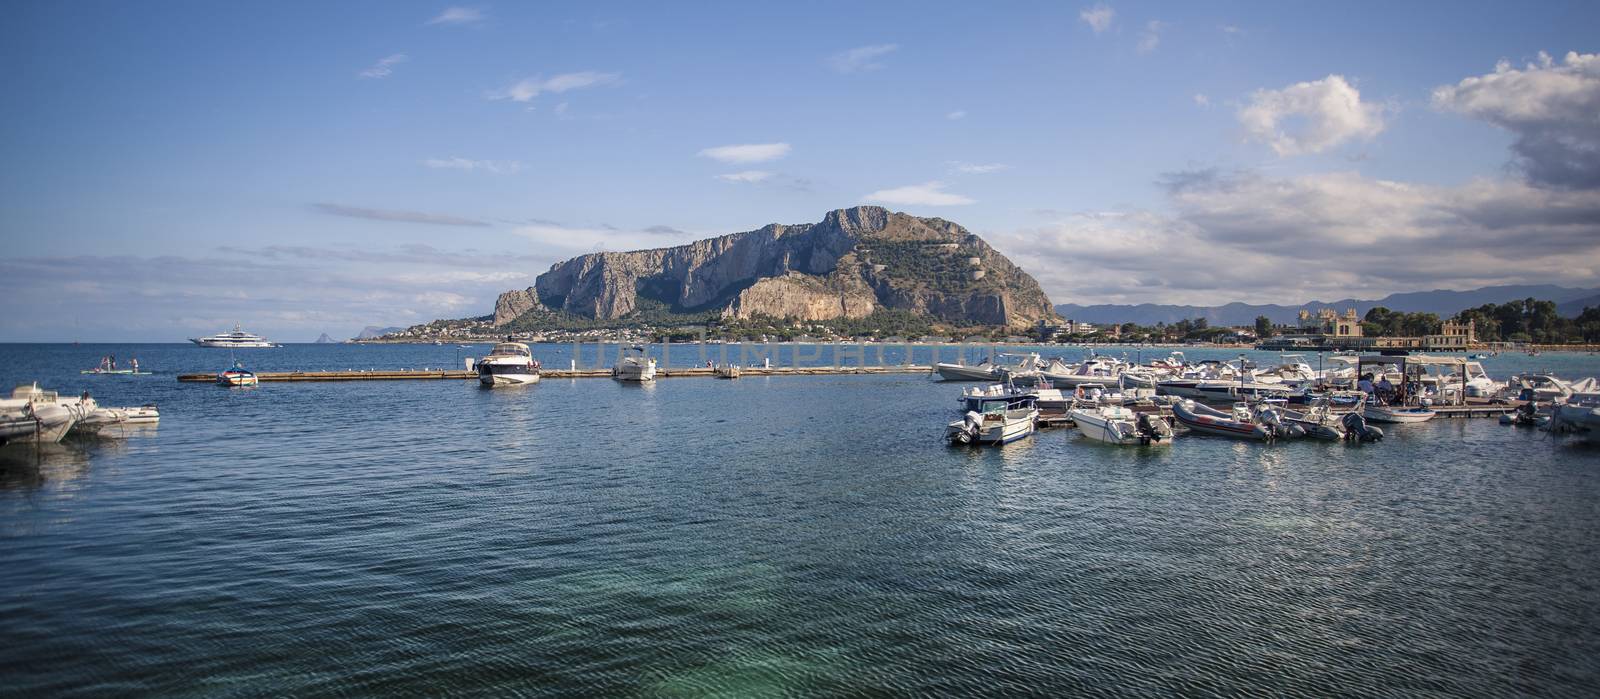 View of Mondello where you can see sea boats and the whole panorama in the background. Panoramic Image